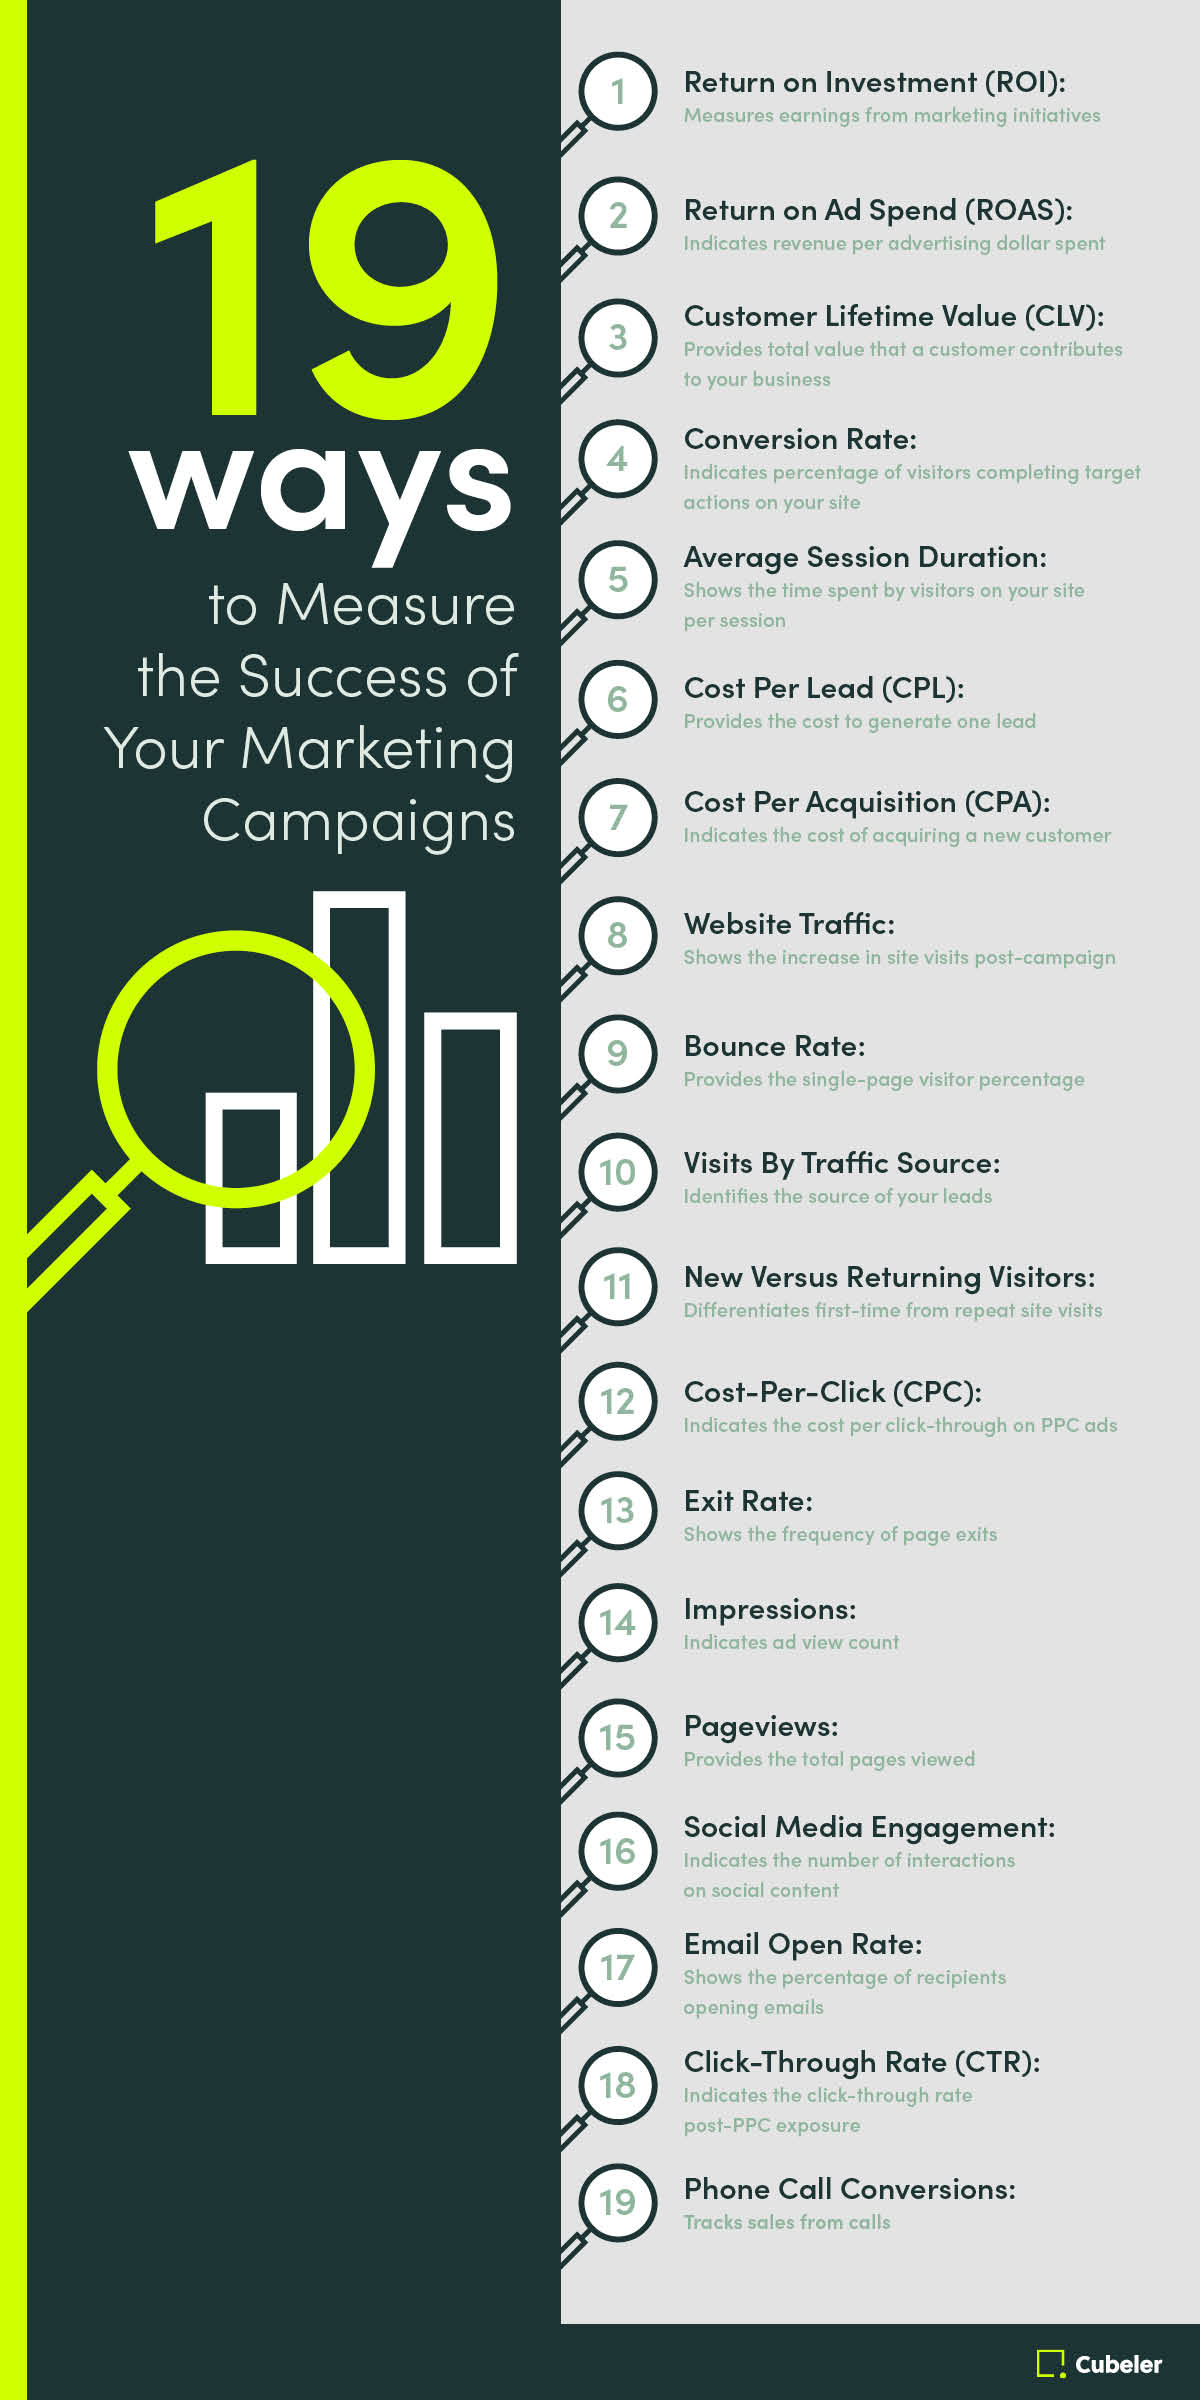 19 Ways to Measure the Success of Your Marketing Campaigns